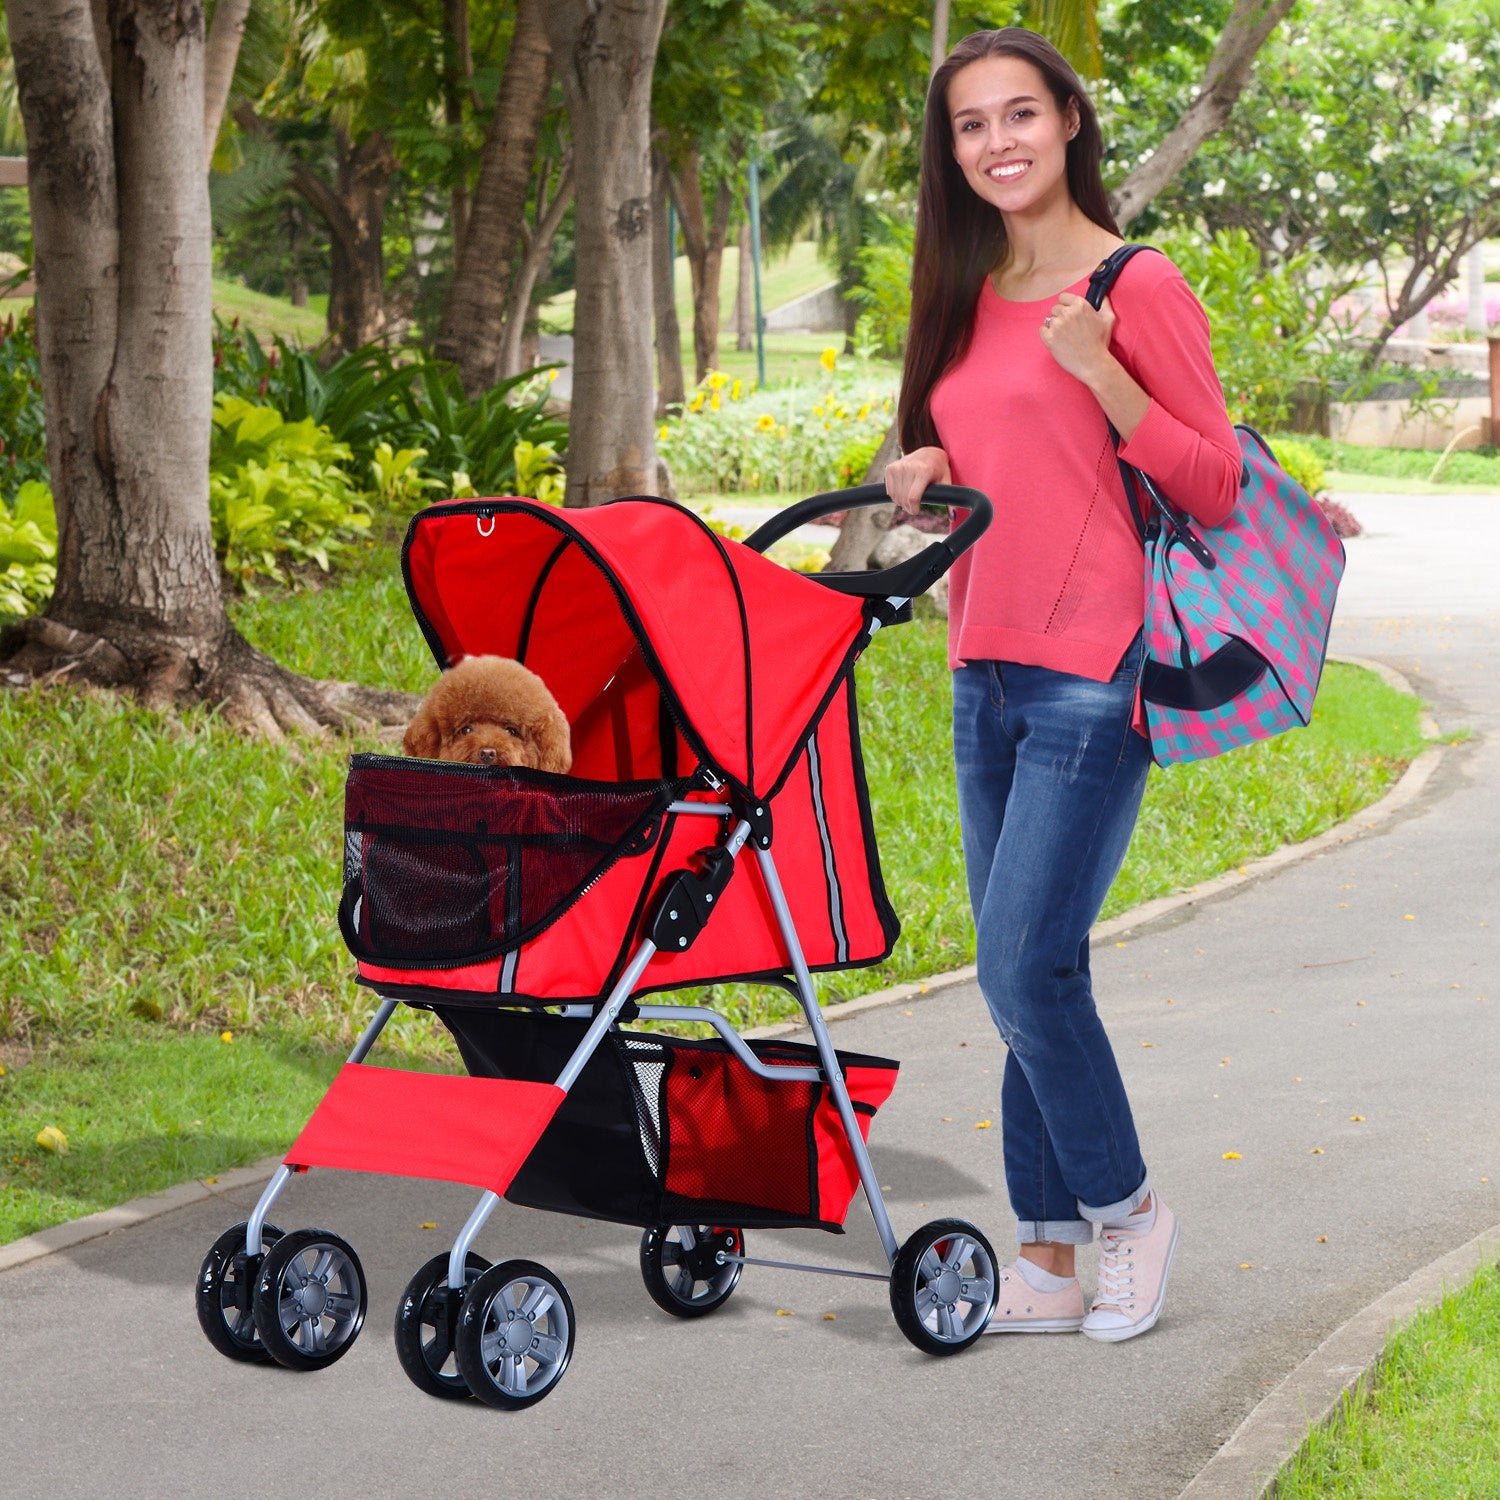 Dogs 600D Oxford Cloth Pram Red - Suitable for Small Pets